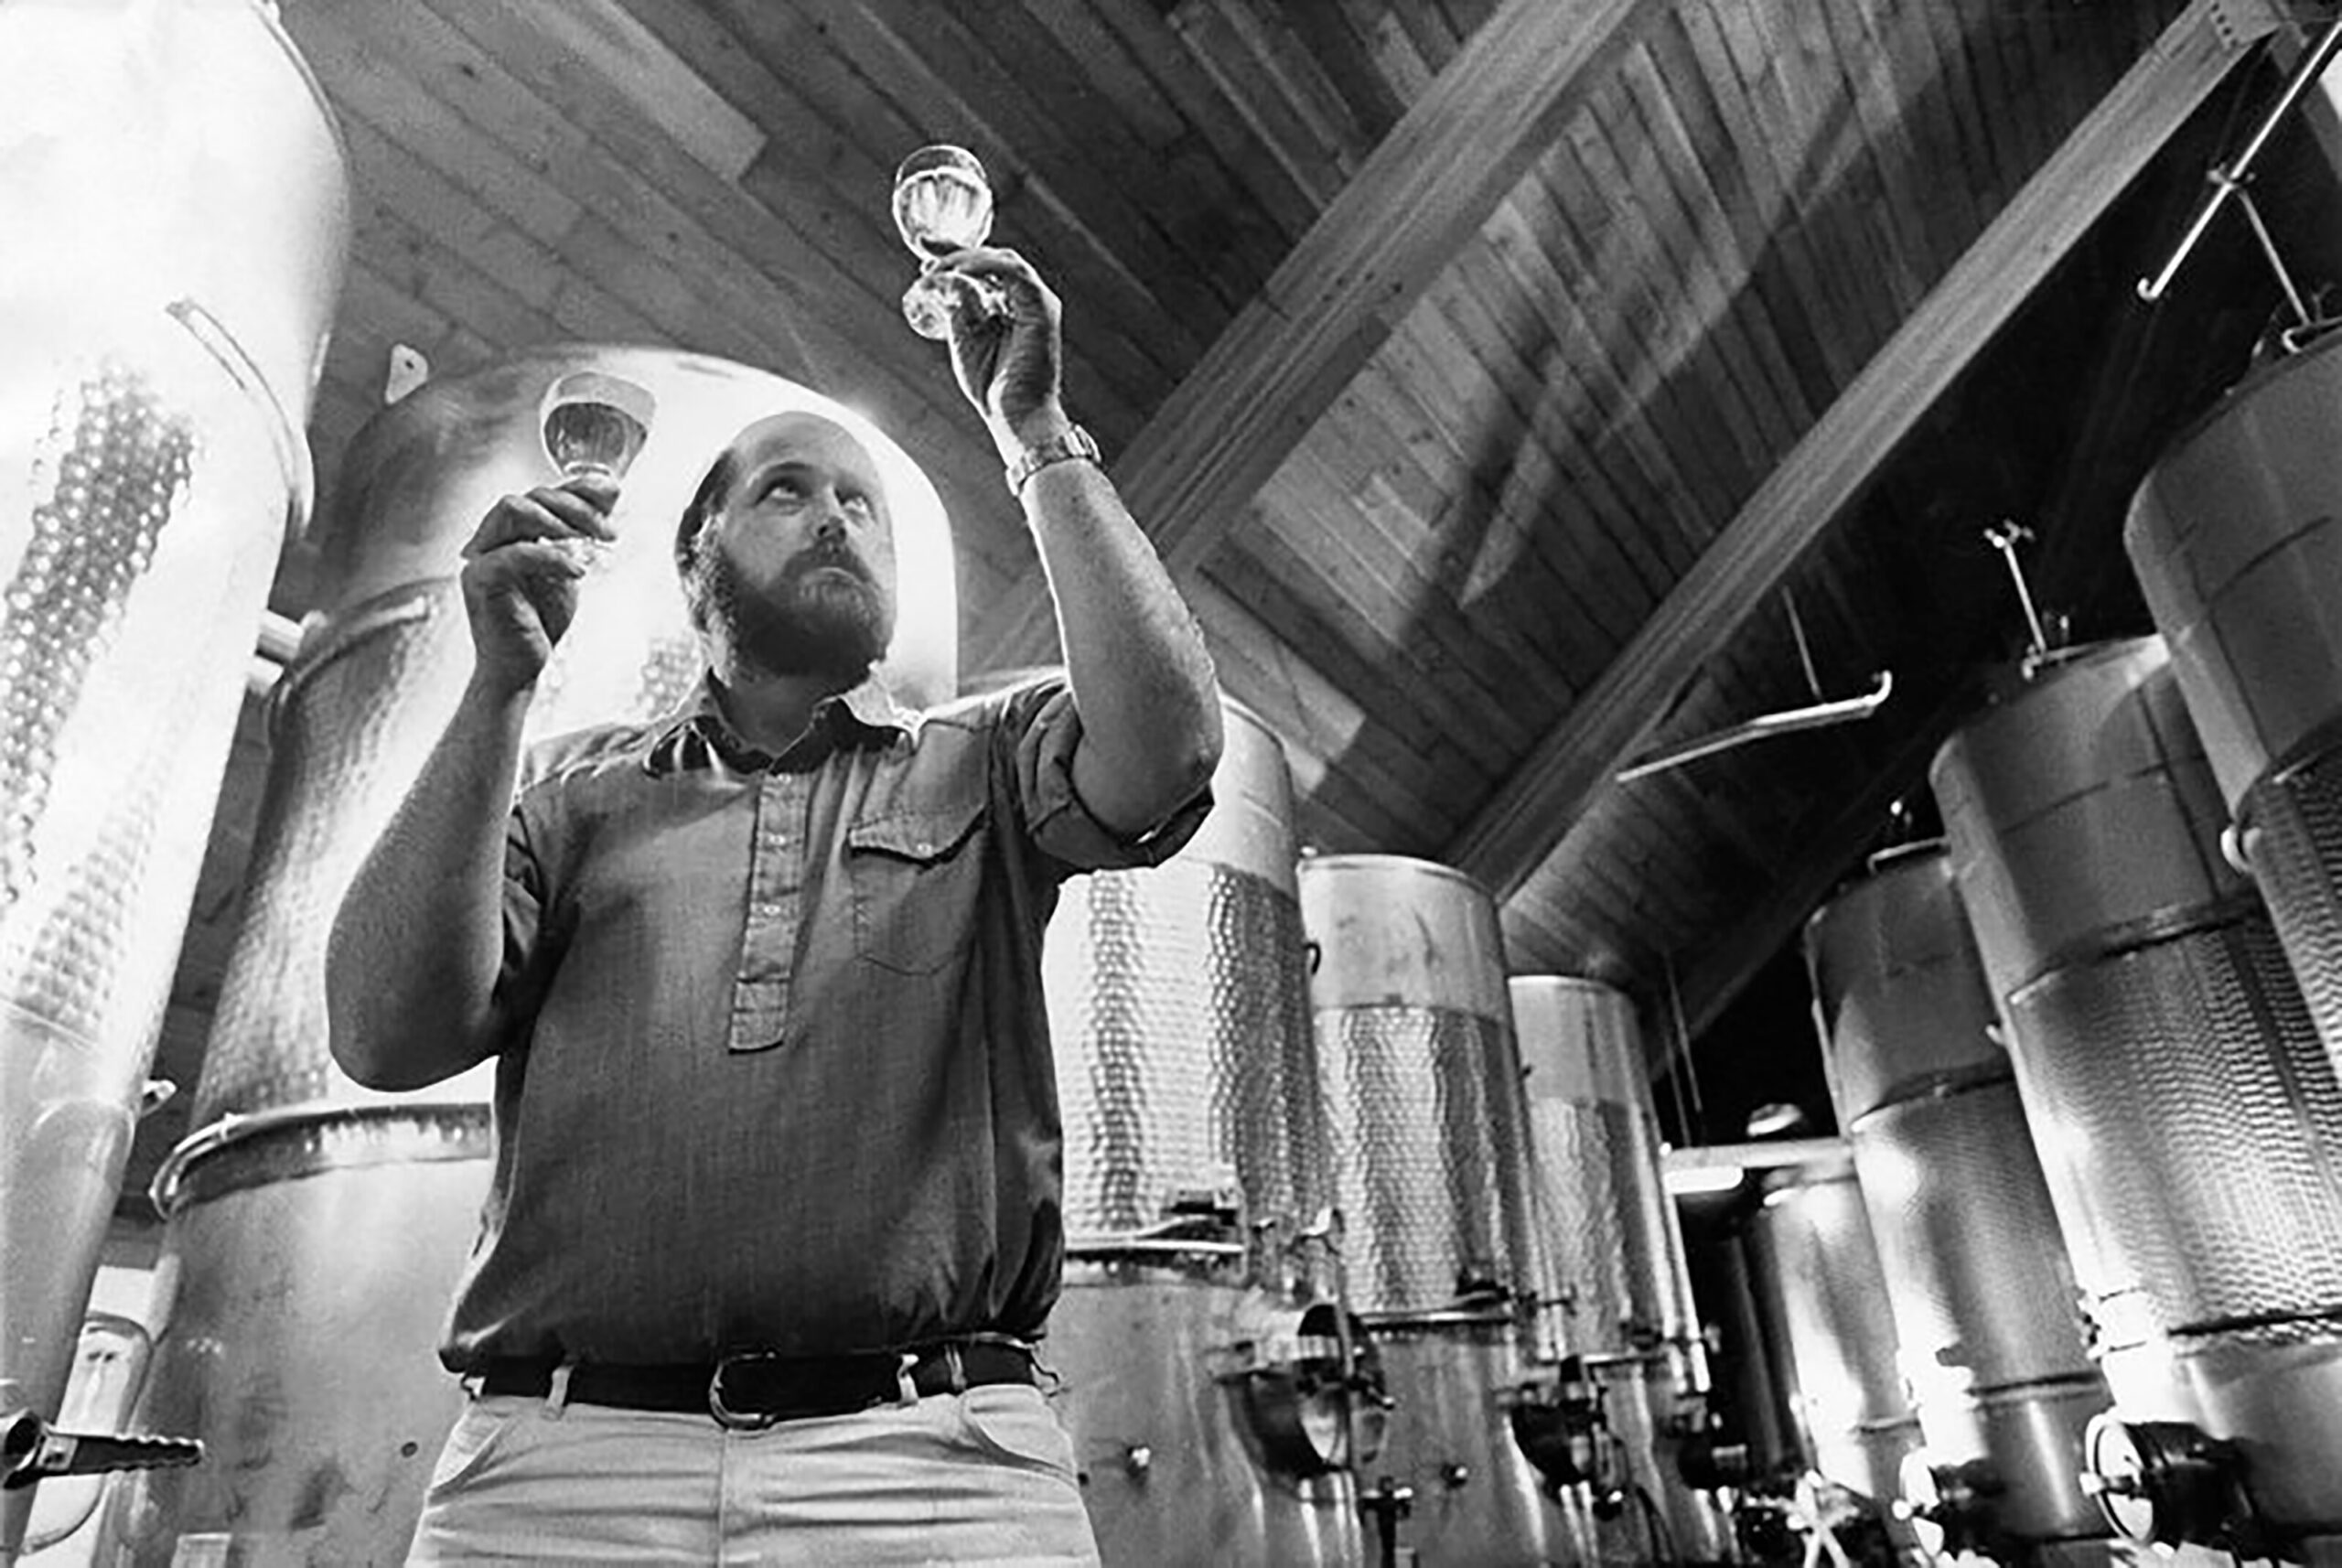 Don Chappellet inspecting two glasses of wine next to silver tanks